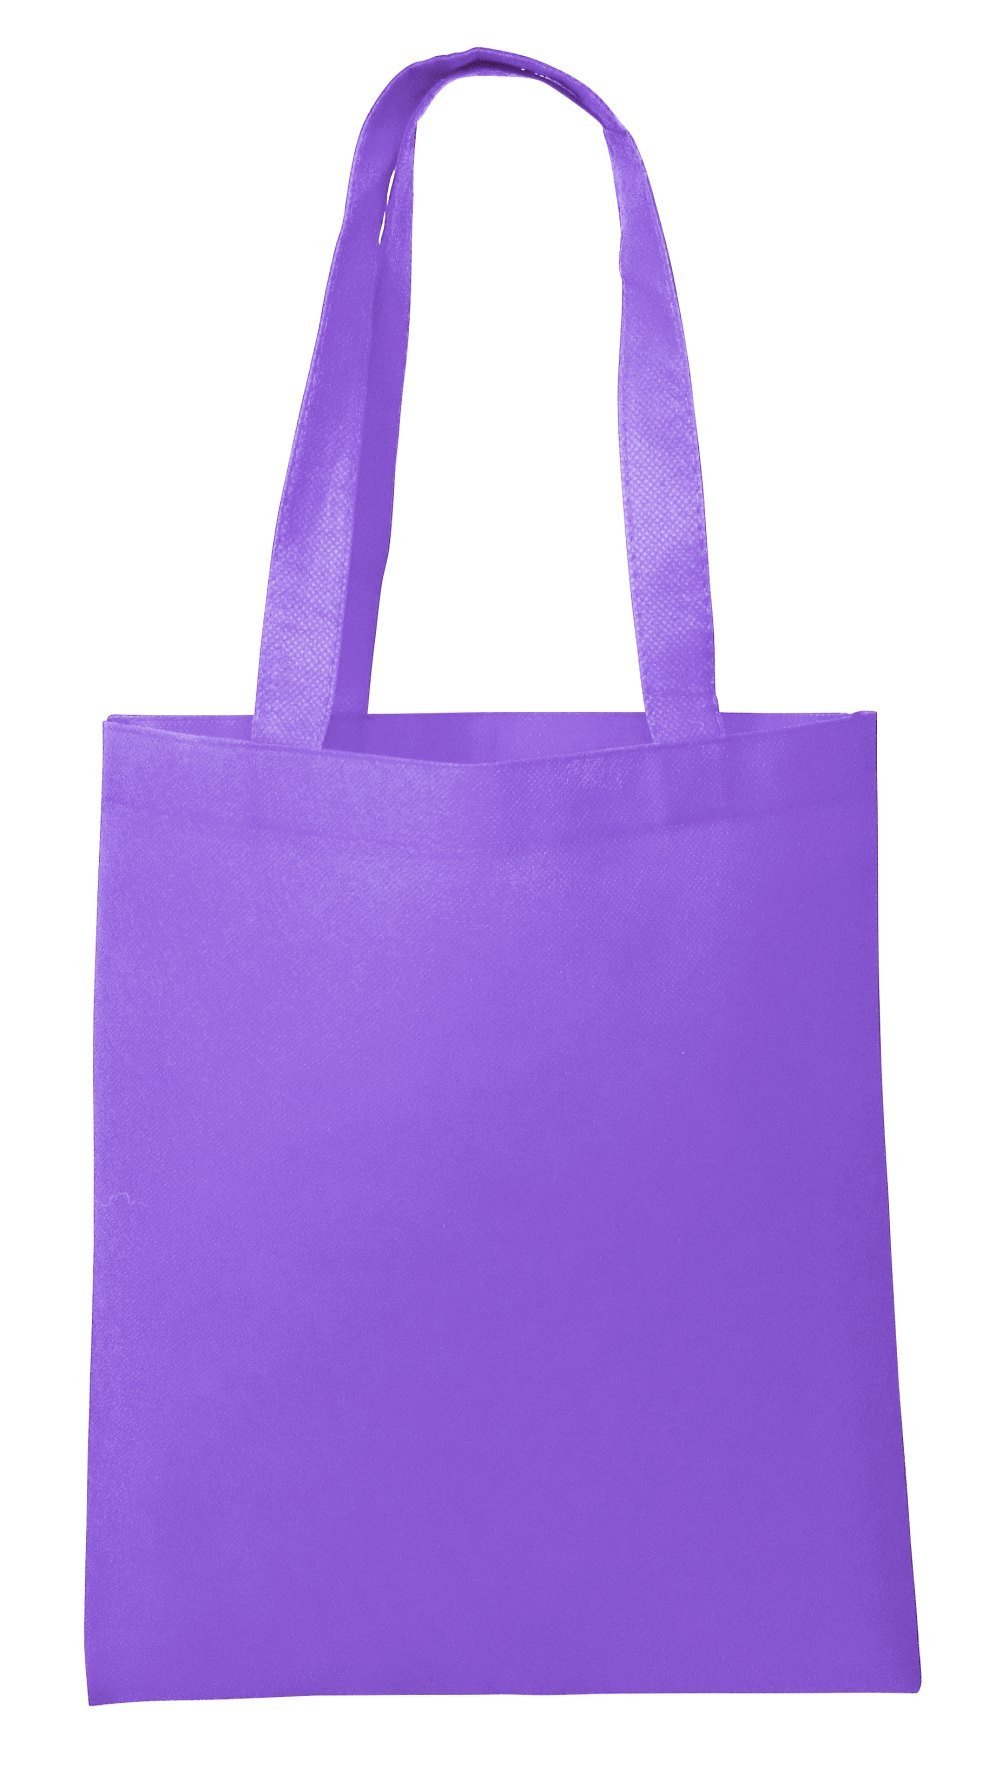 Cheap Promotional Tote Bags hycinth